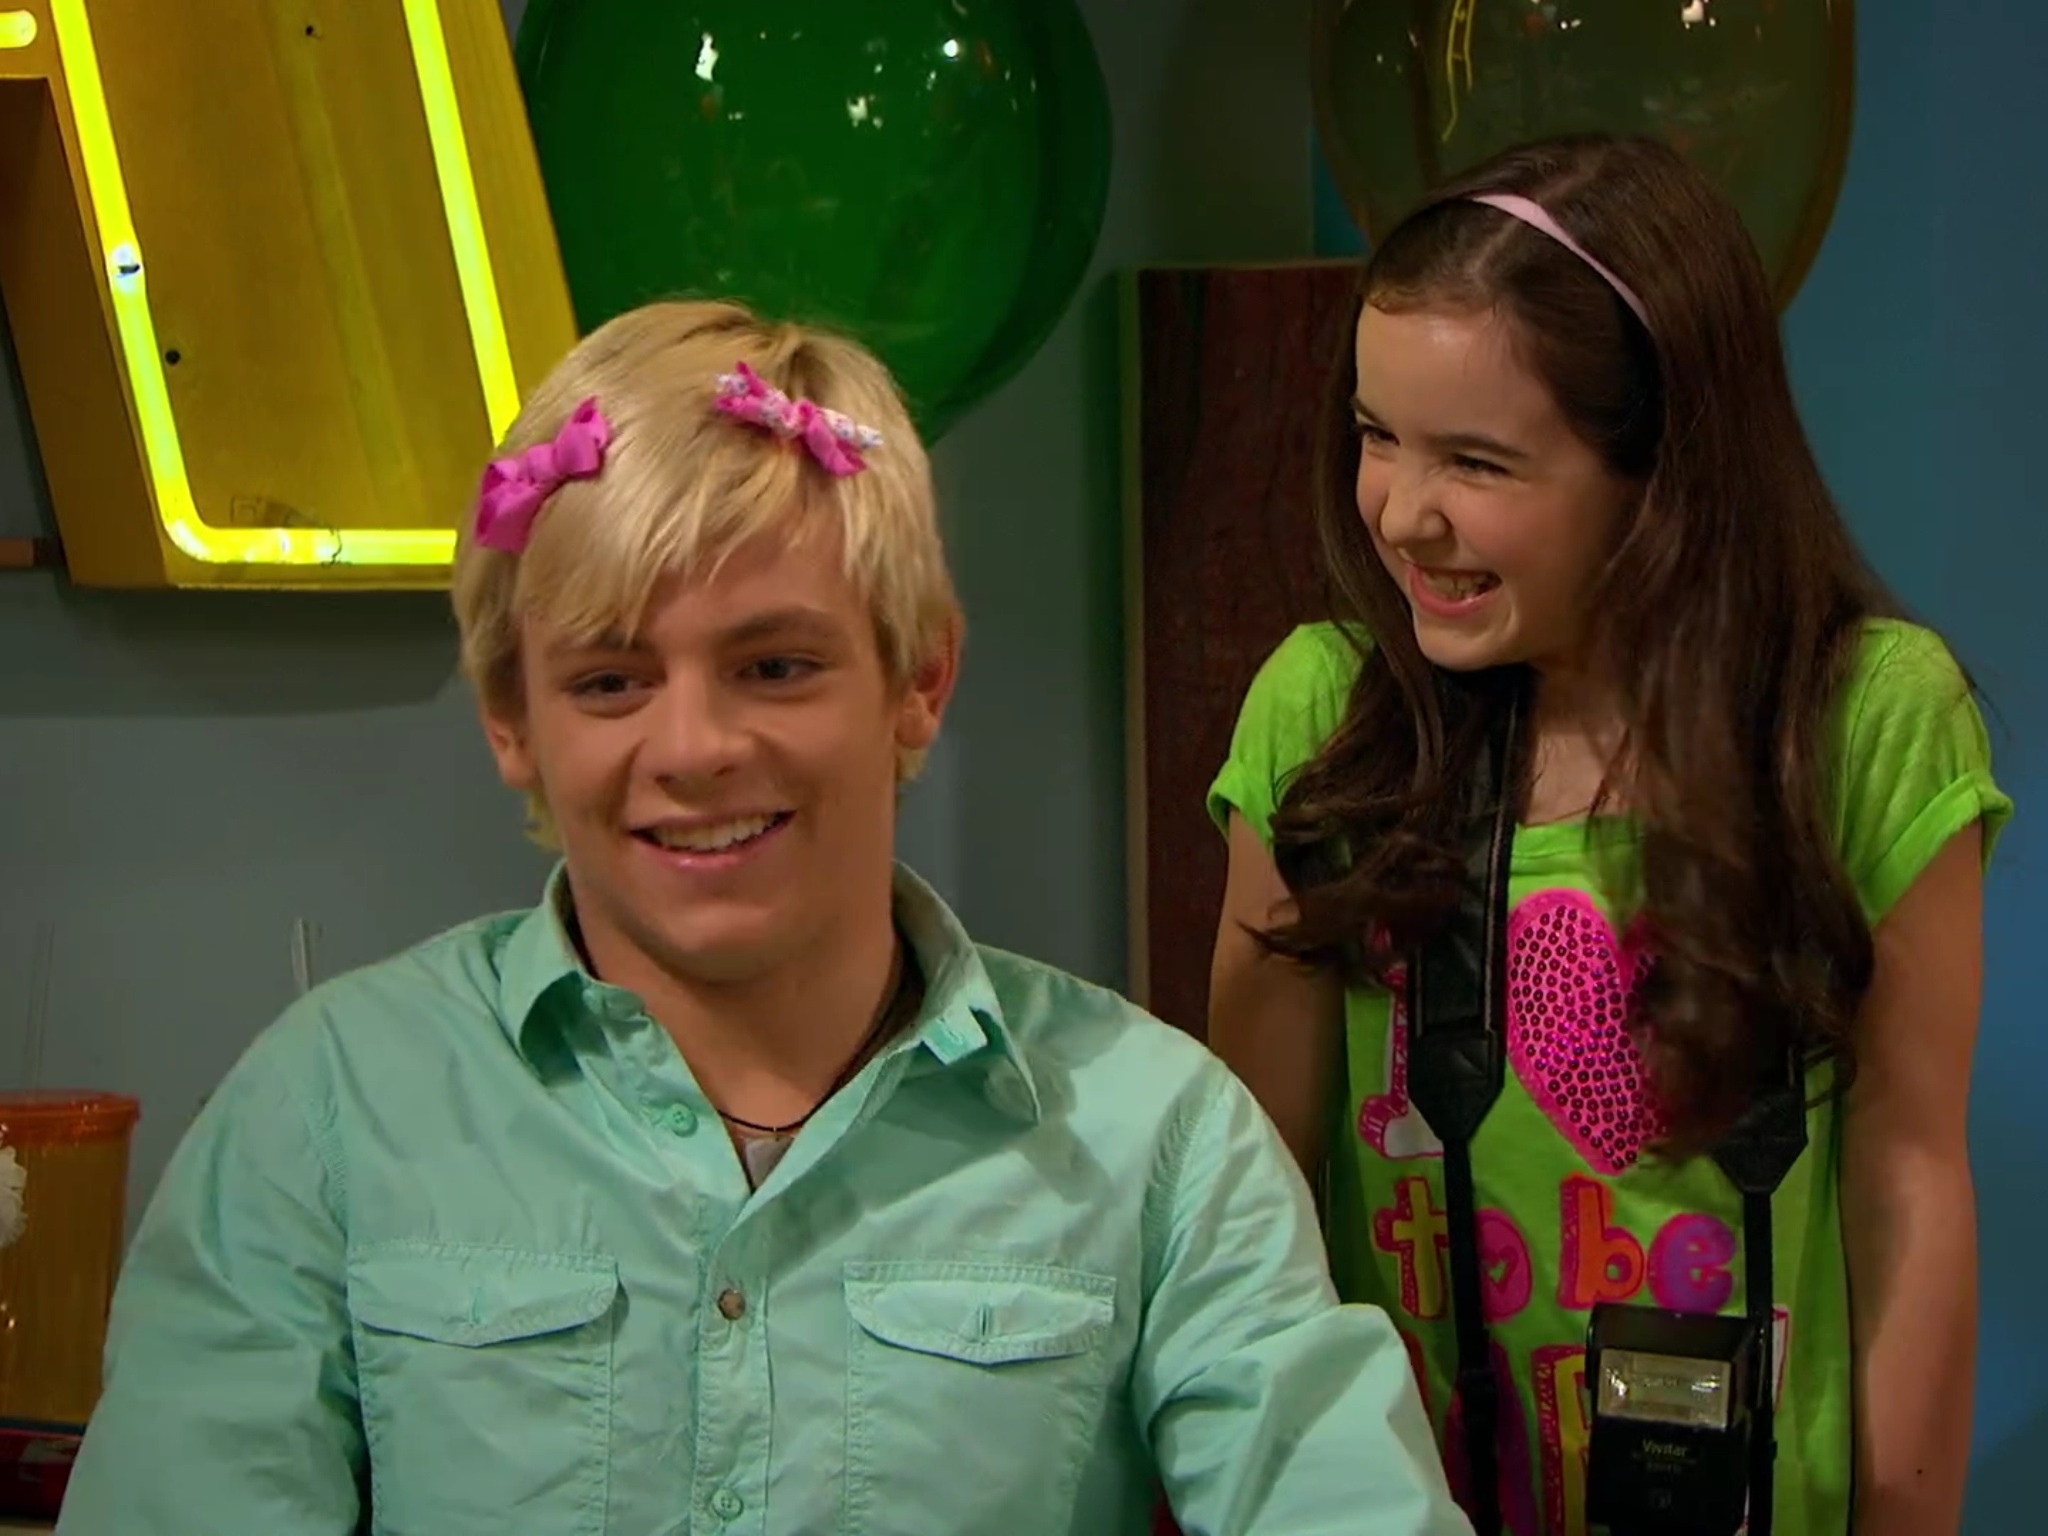 Awww so cute...Magazines and Made-up Stuff episode on Austin and Ally!